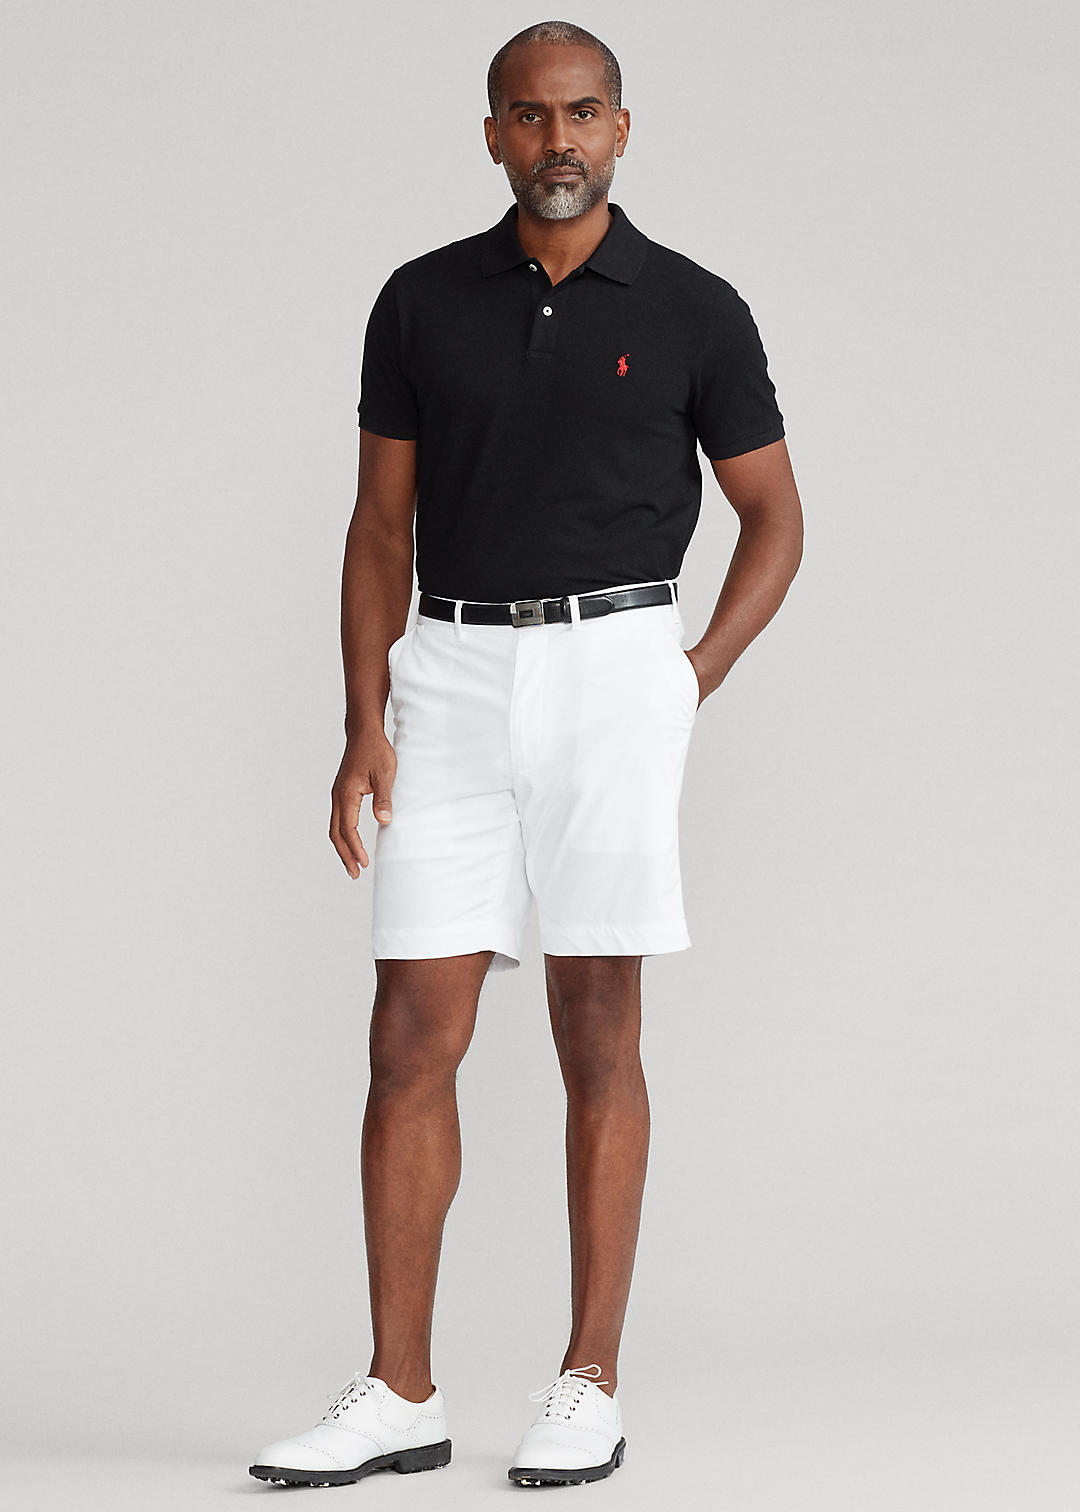 9 Inch Classic Fit Performance Short